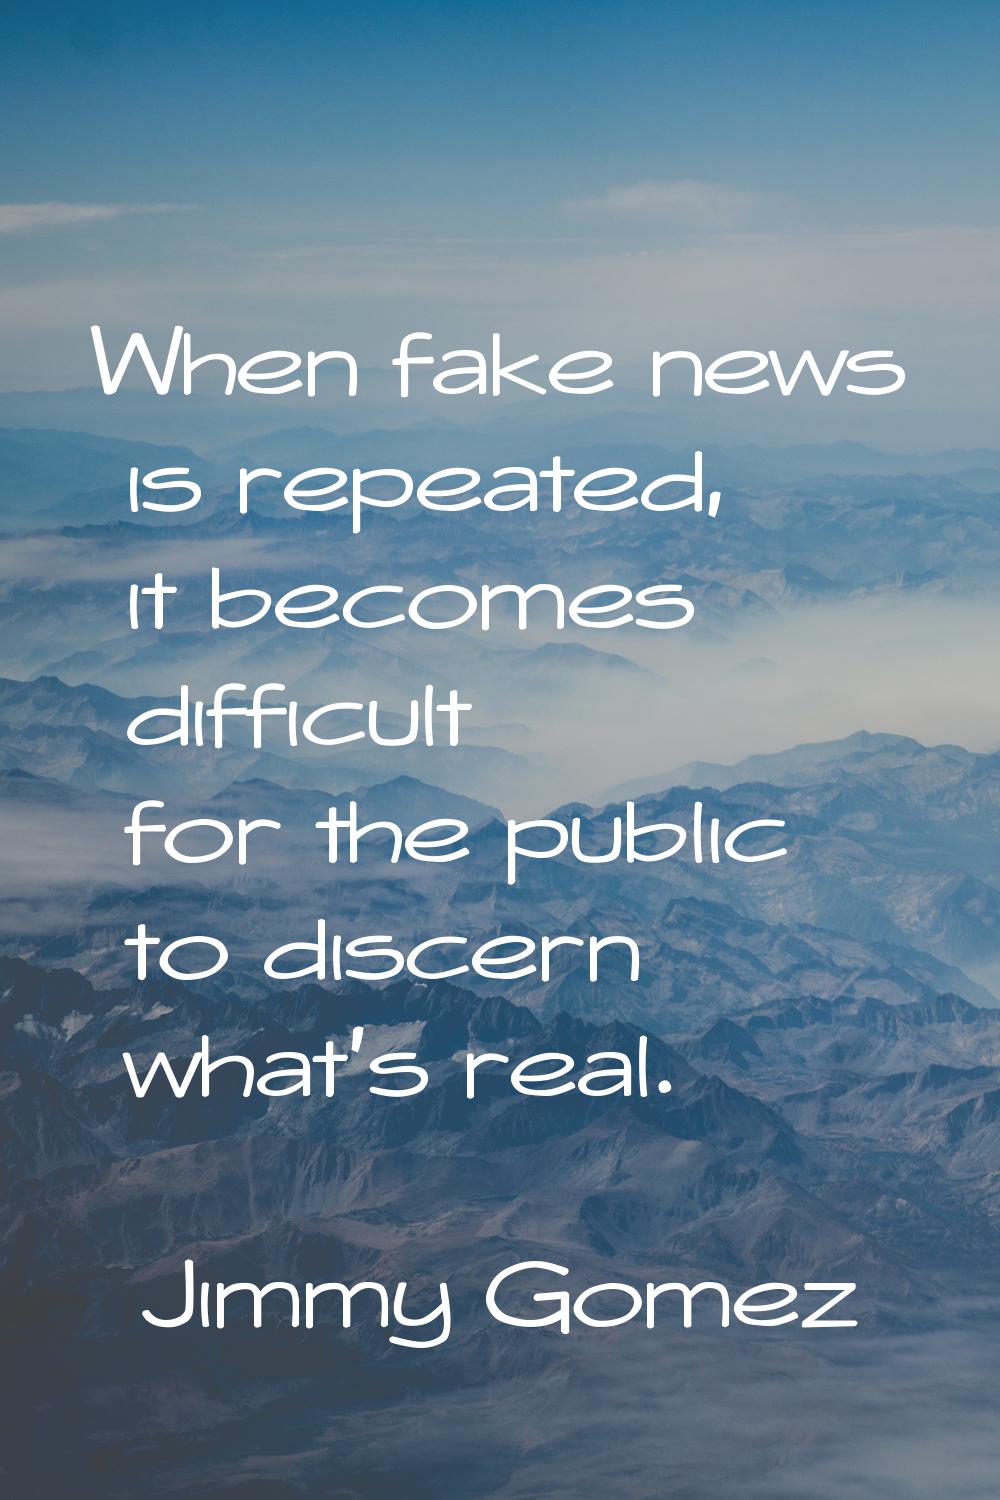 When fake news is repeated, it becomes difficult for the public to discern what's real.